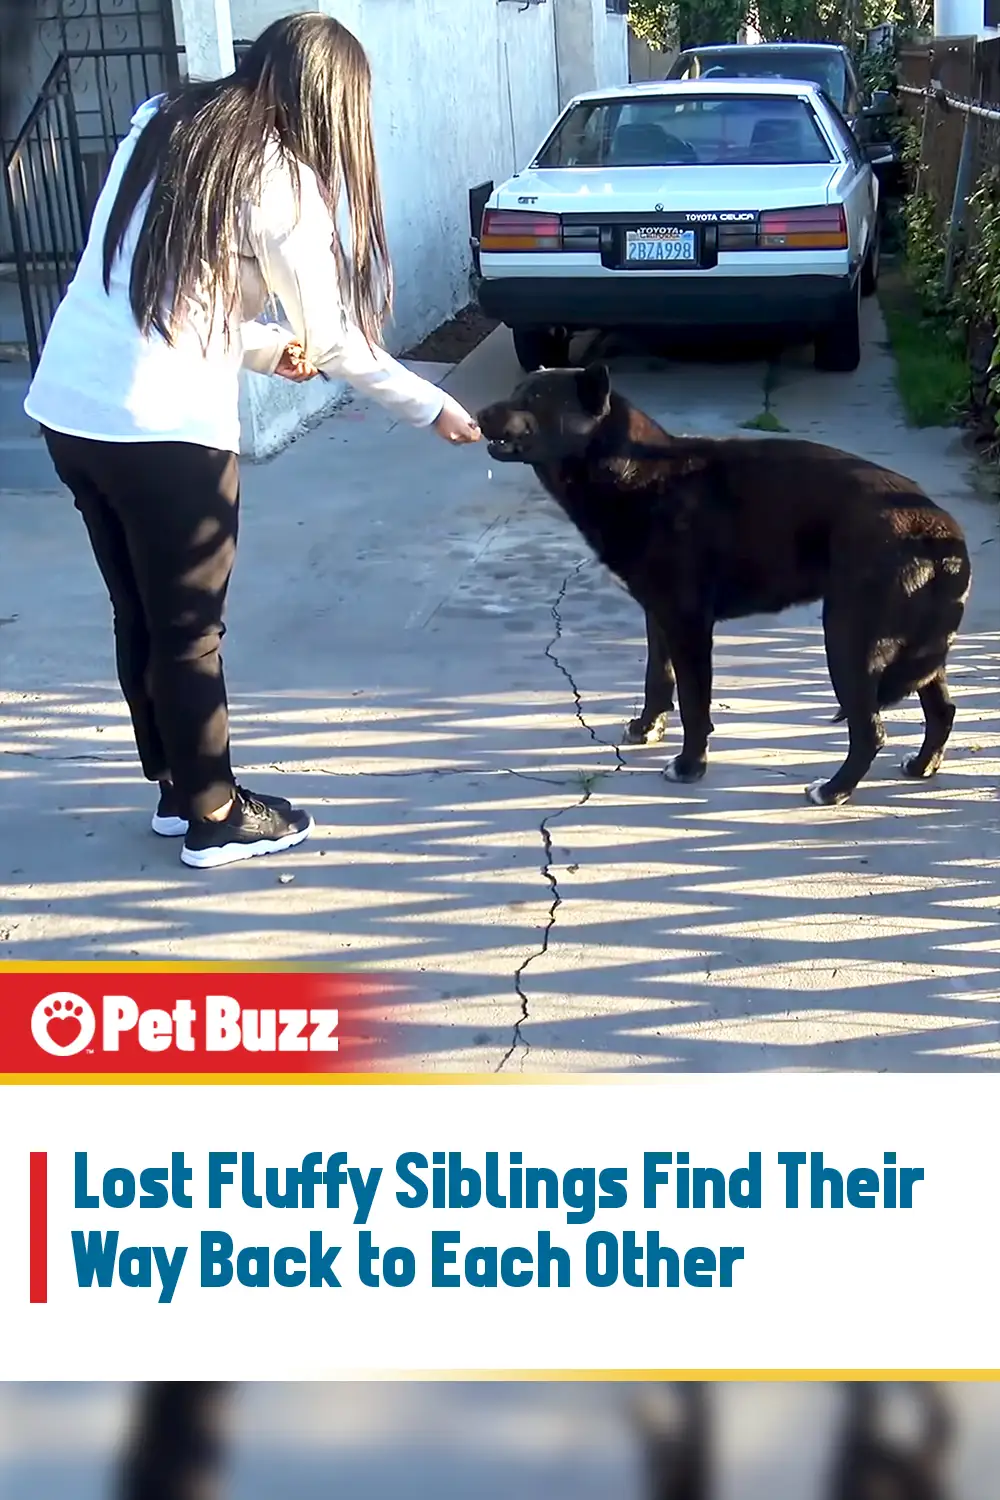 Lost Fluffy Siblings Find Their Way Back to Each Other